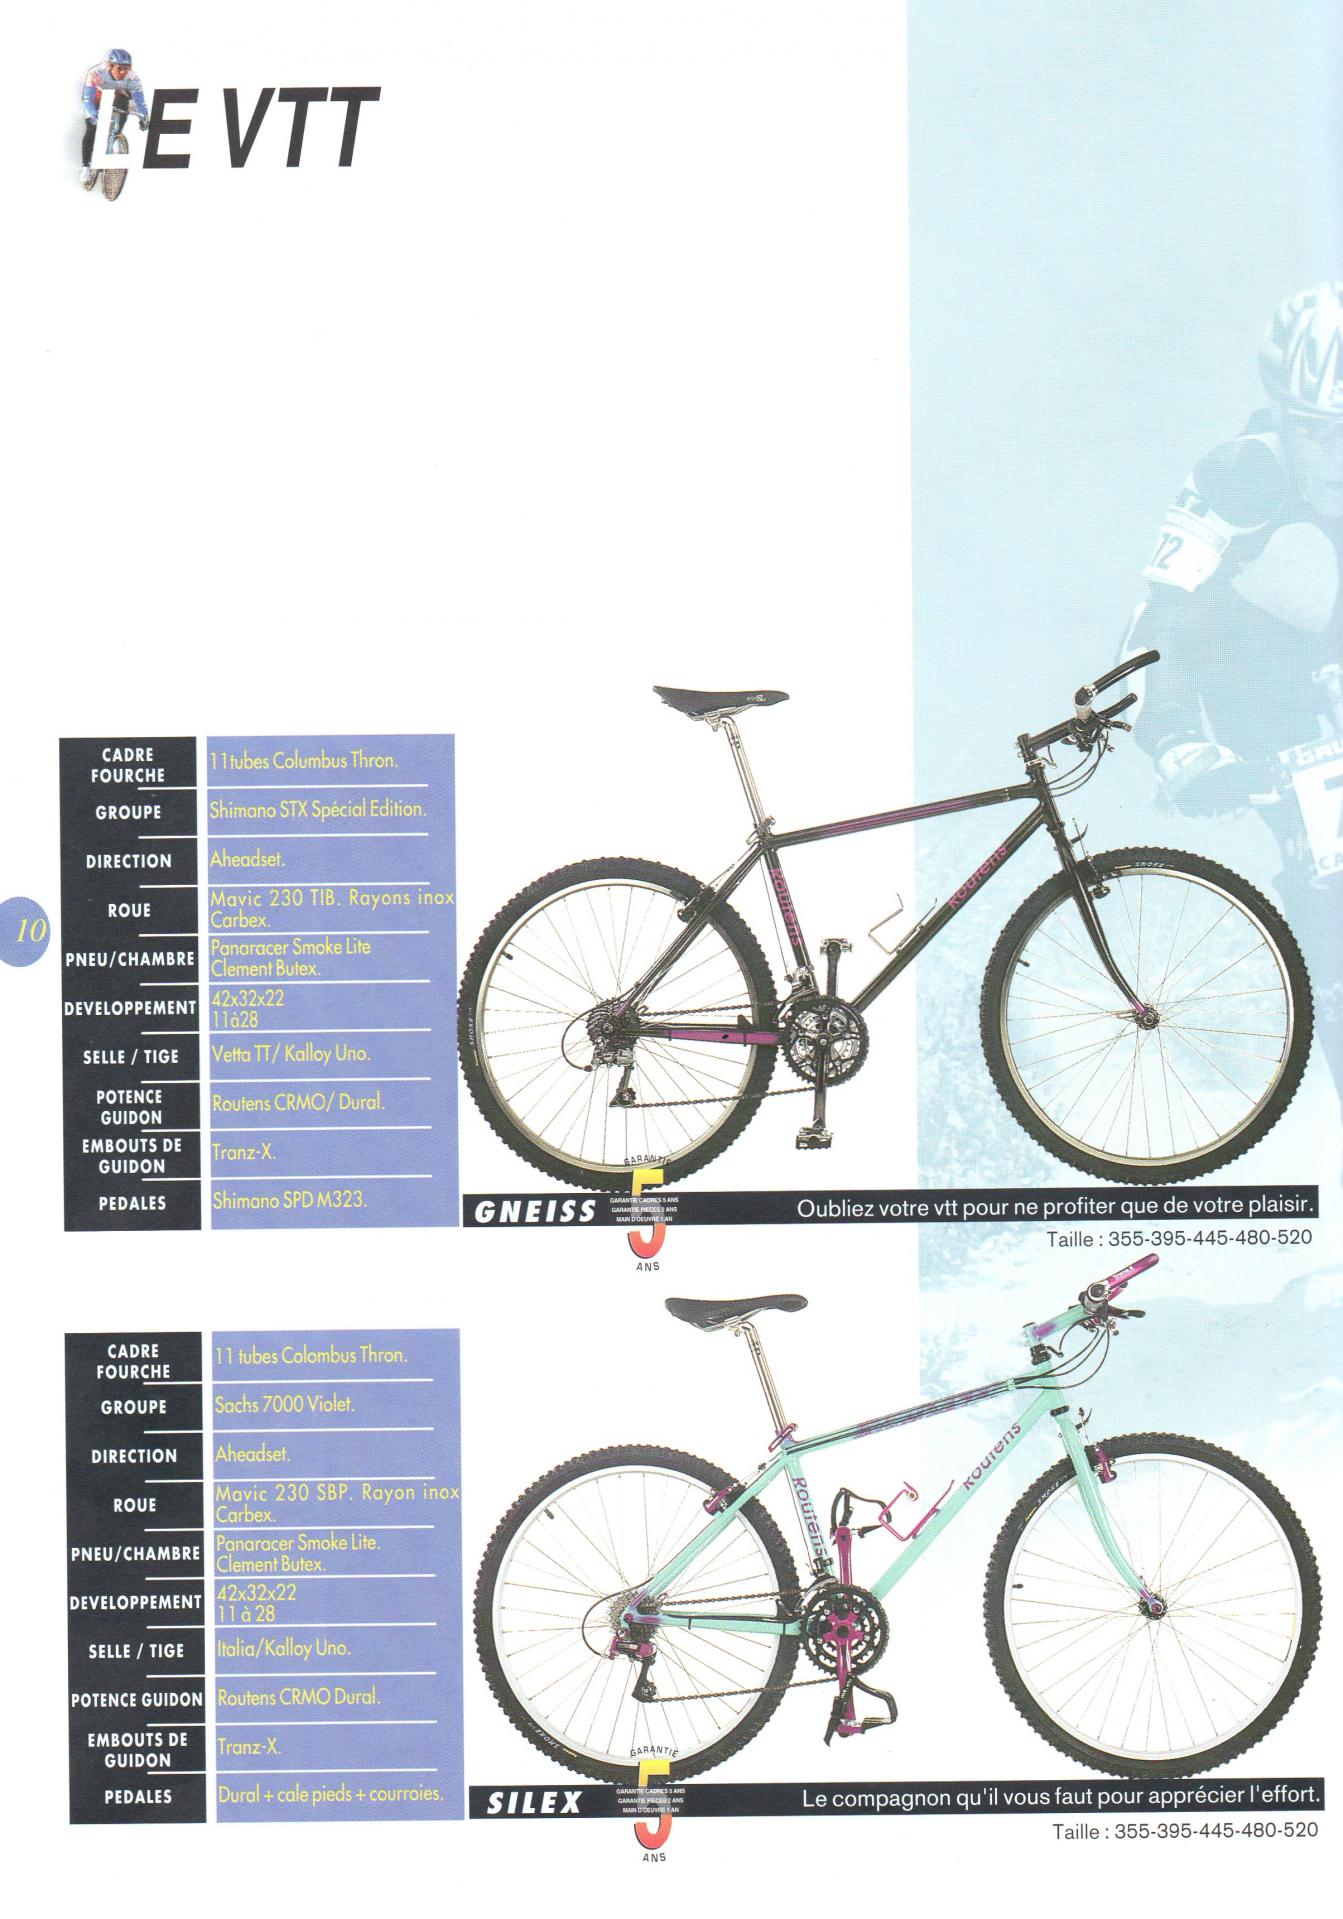 Routens cycles catalogue 1994 10